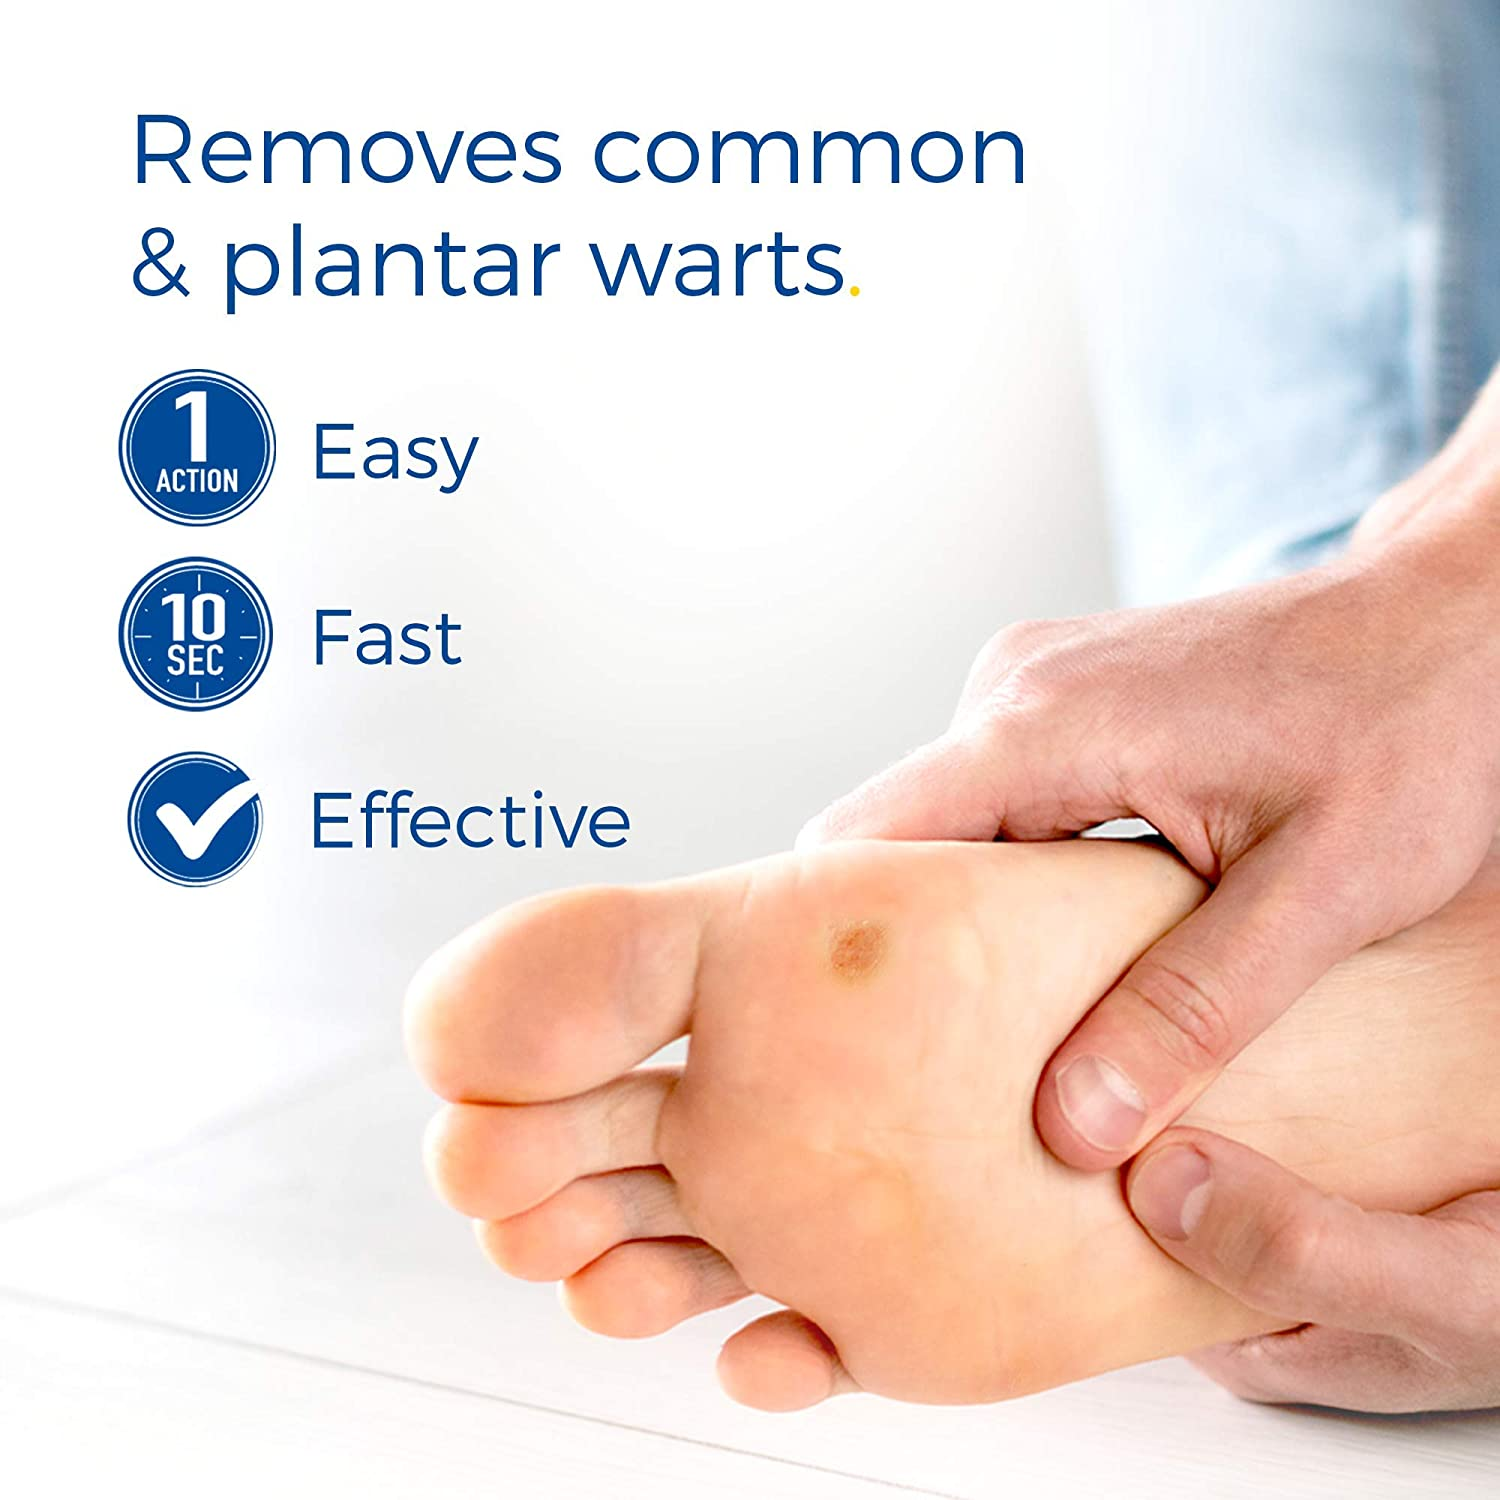 Dr. Scholl'S Freeze Away MAX Wart Remover 10 Applications, Safe to Use on Children 4+, Our Fastest Treatment Time